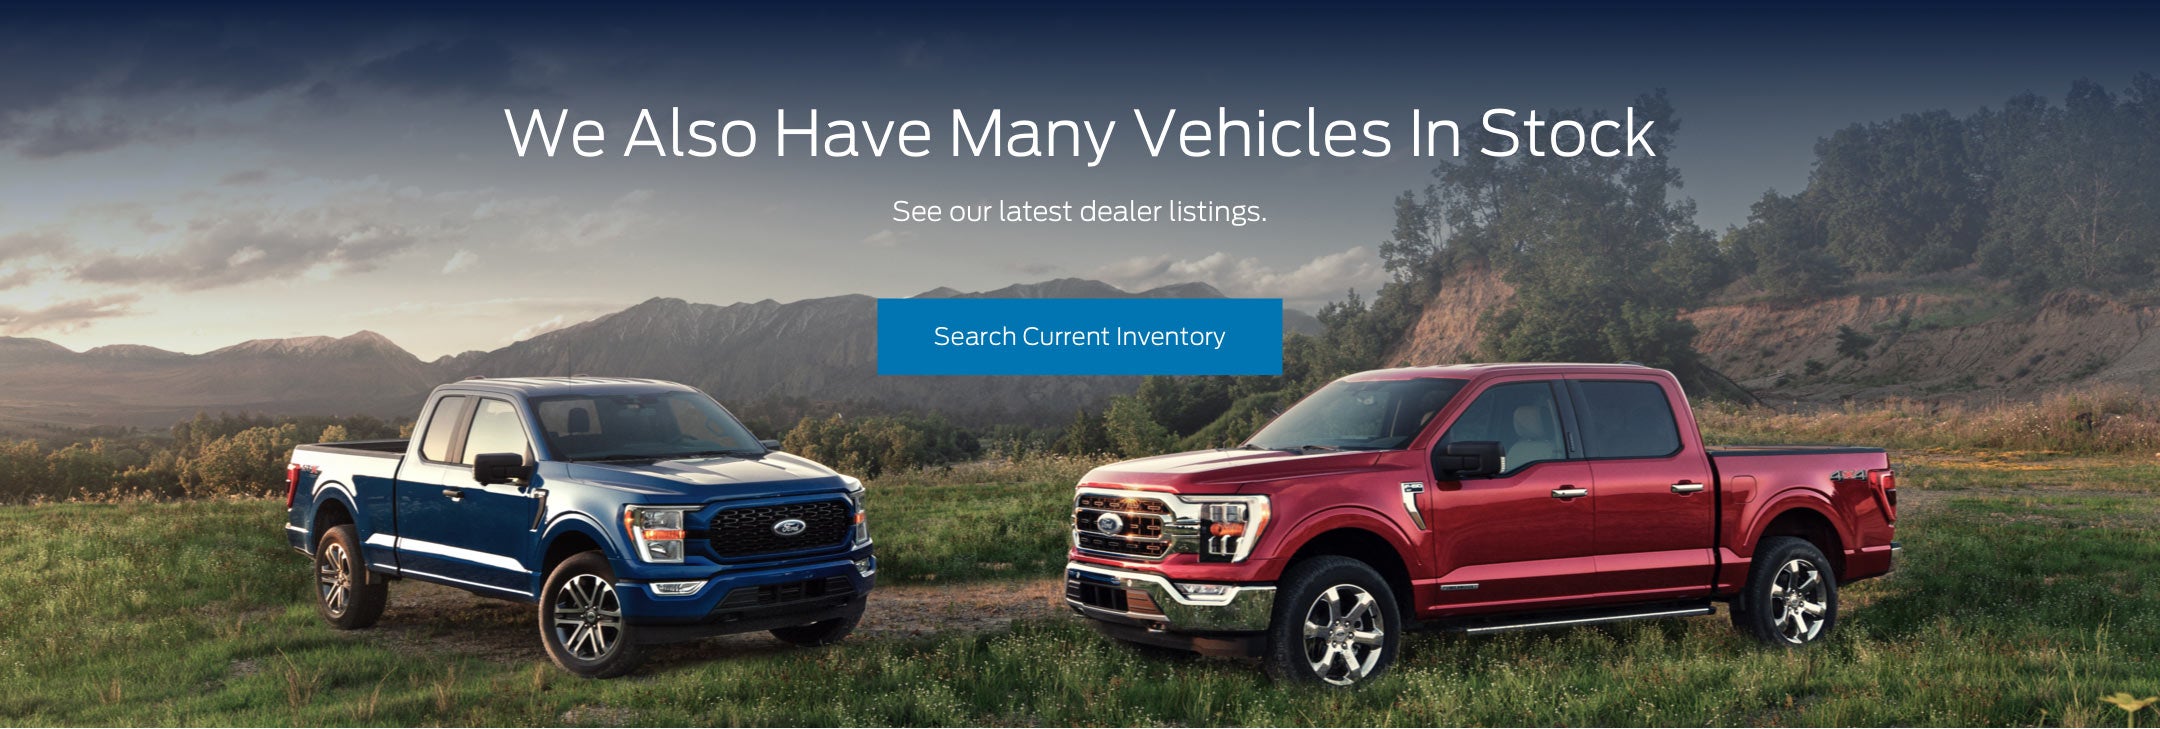 Ford vehicles in stock | Jay Hatfield Ford - Sarcoxie, MO in Sarcoxie MO